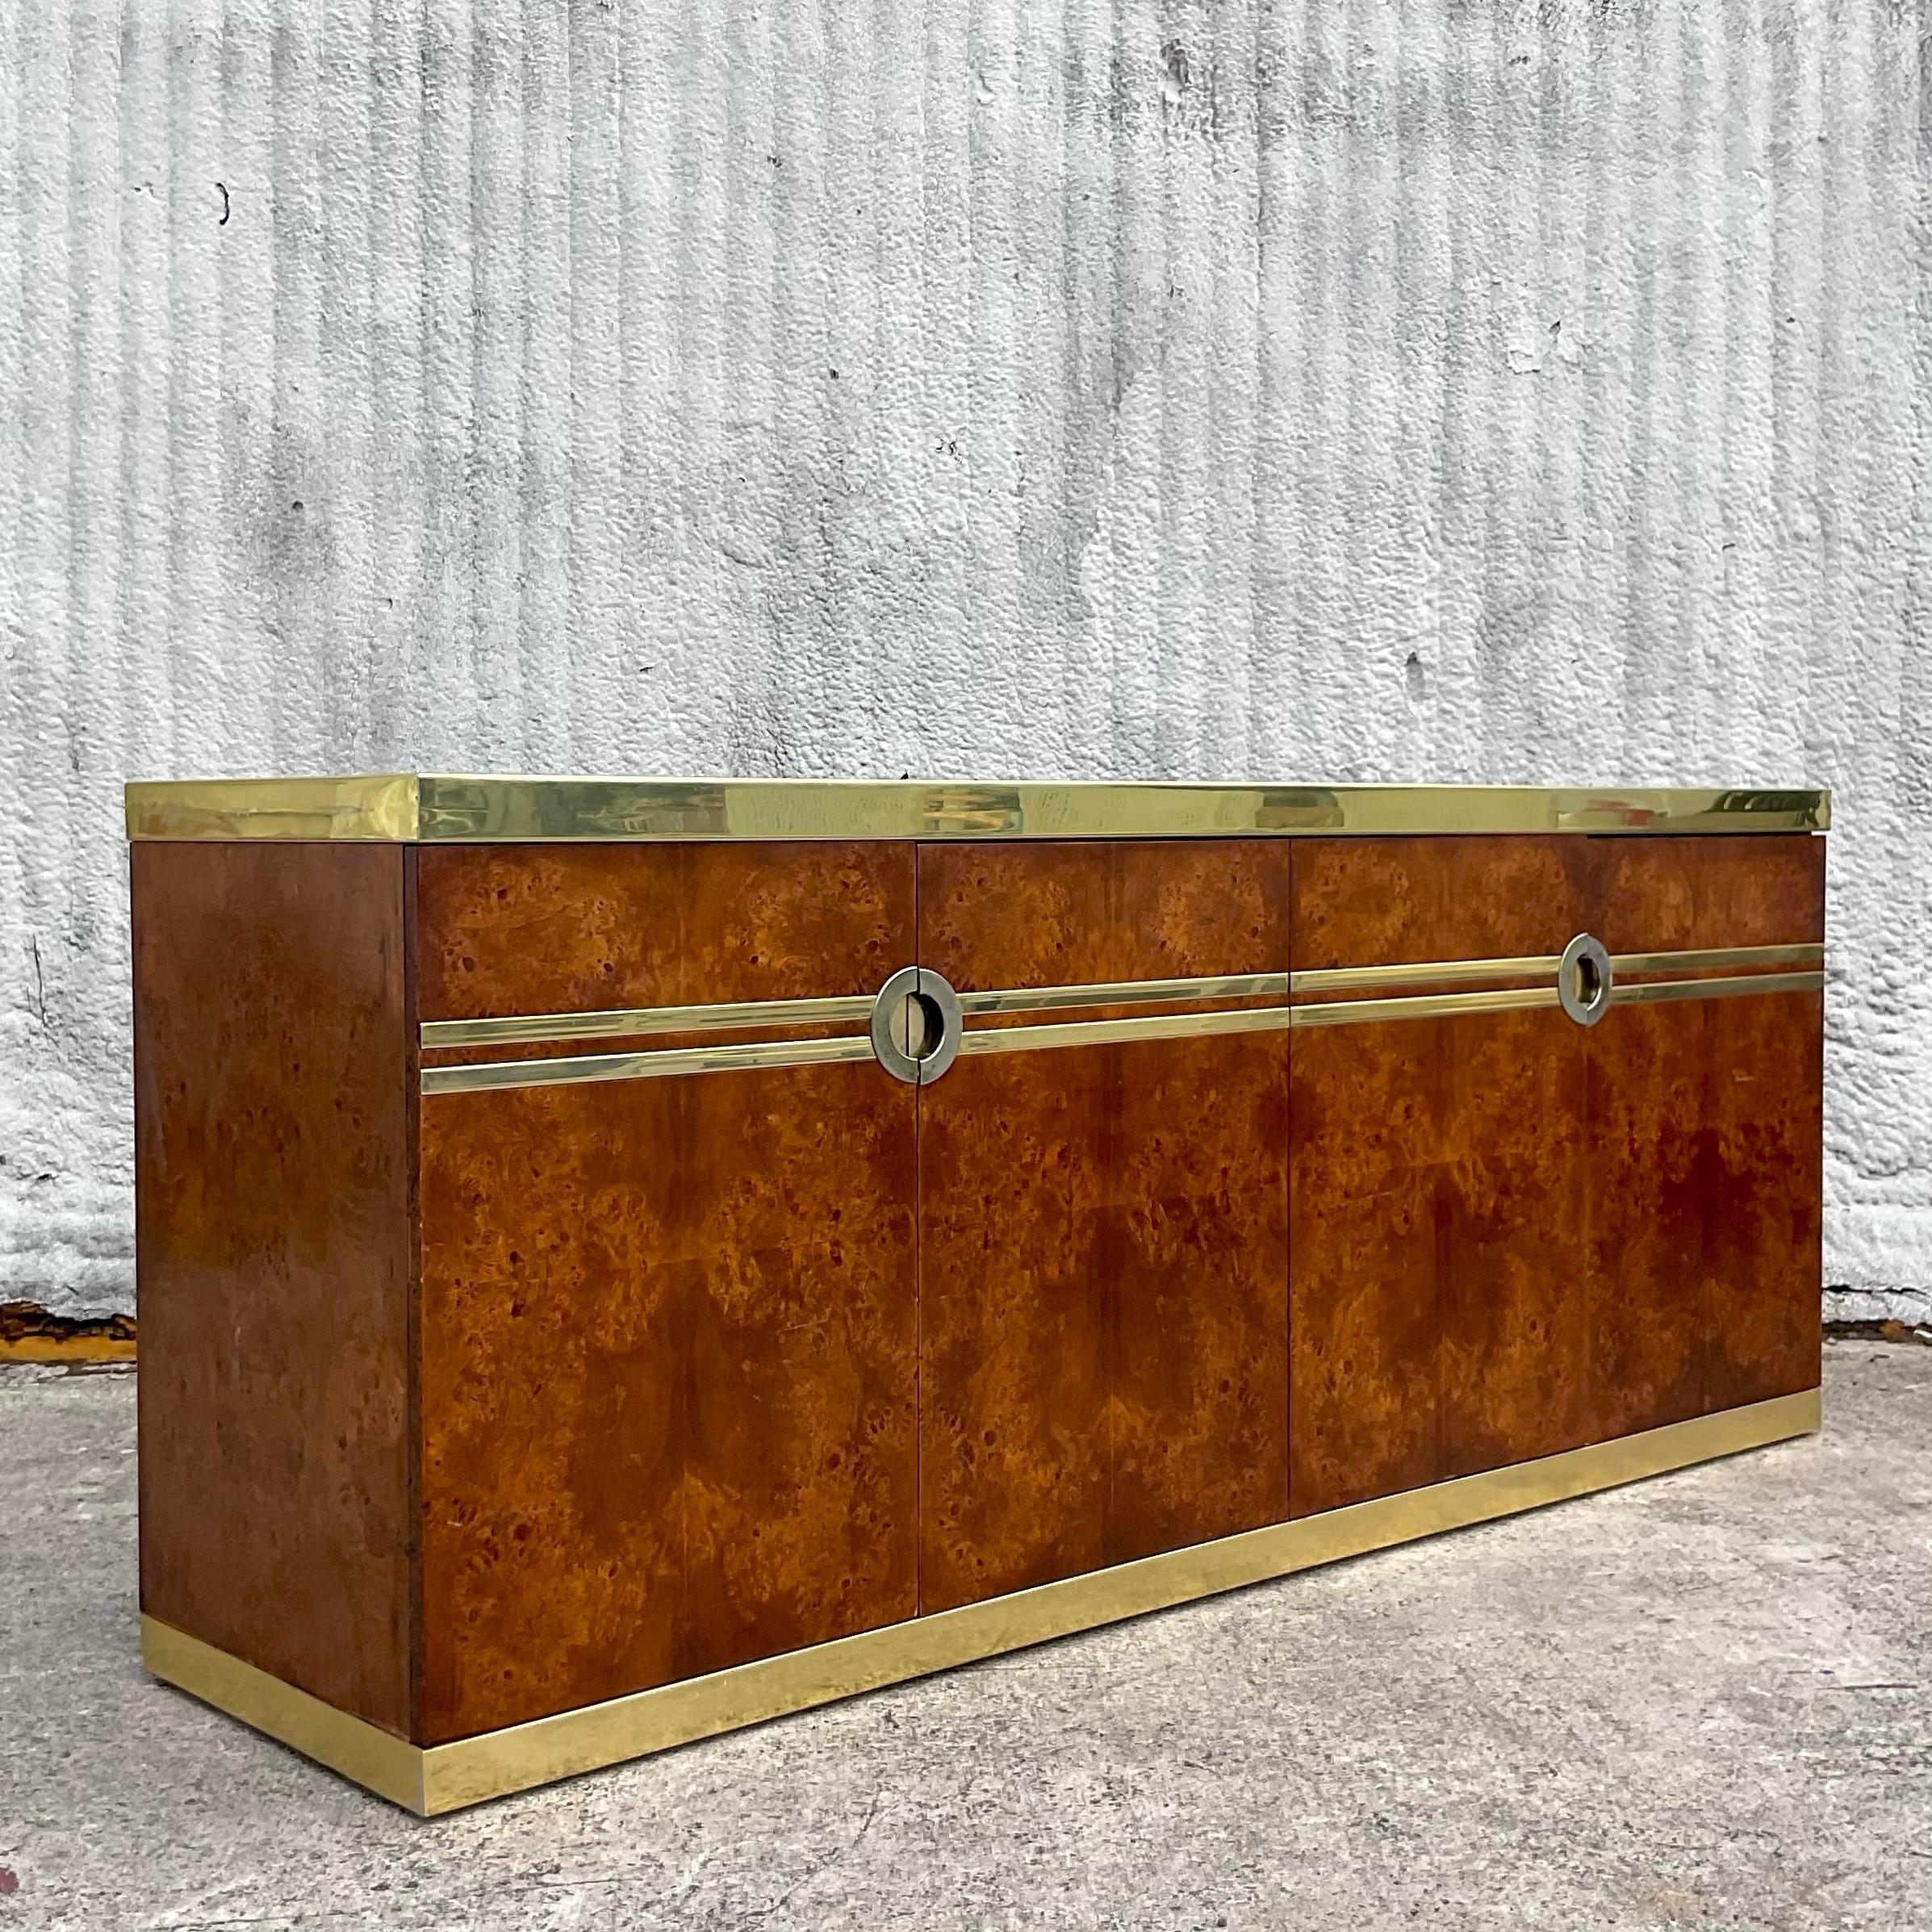 Infuse your space with mid-century French flair! This vintage boho Pierre Cardin burl wood and brass credenza epitomizes timeless sophistication and exceptional craftsmanship. With its sleek lines, rich textures, and elegant brass accents, this